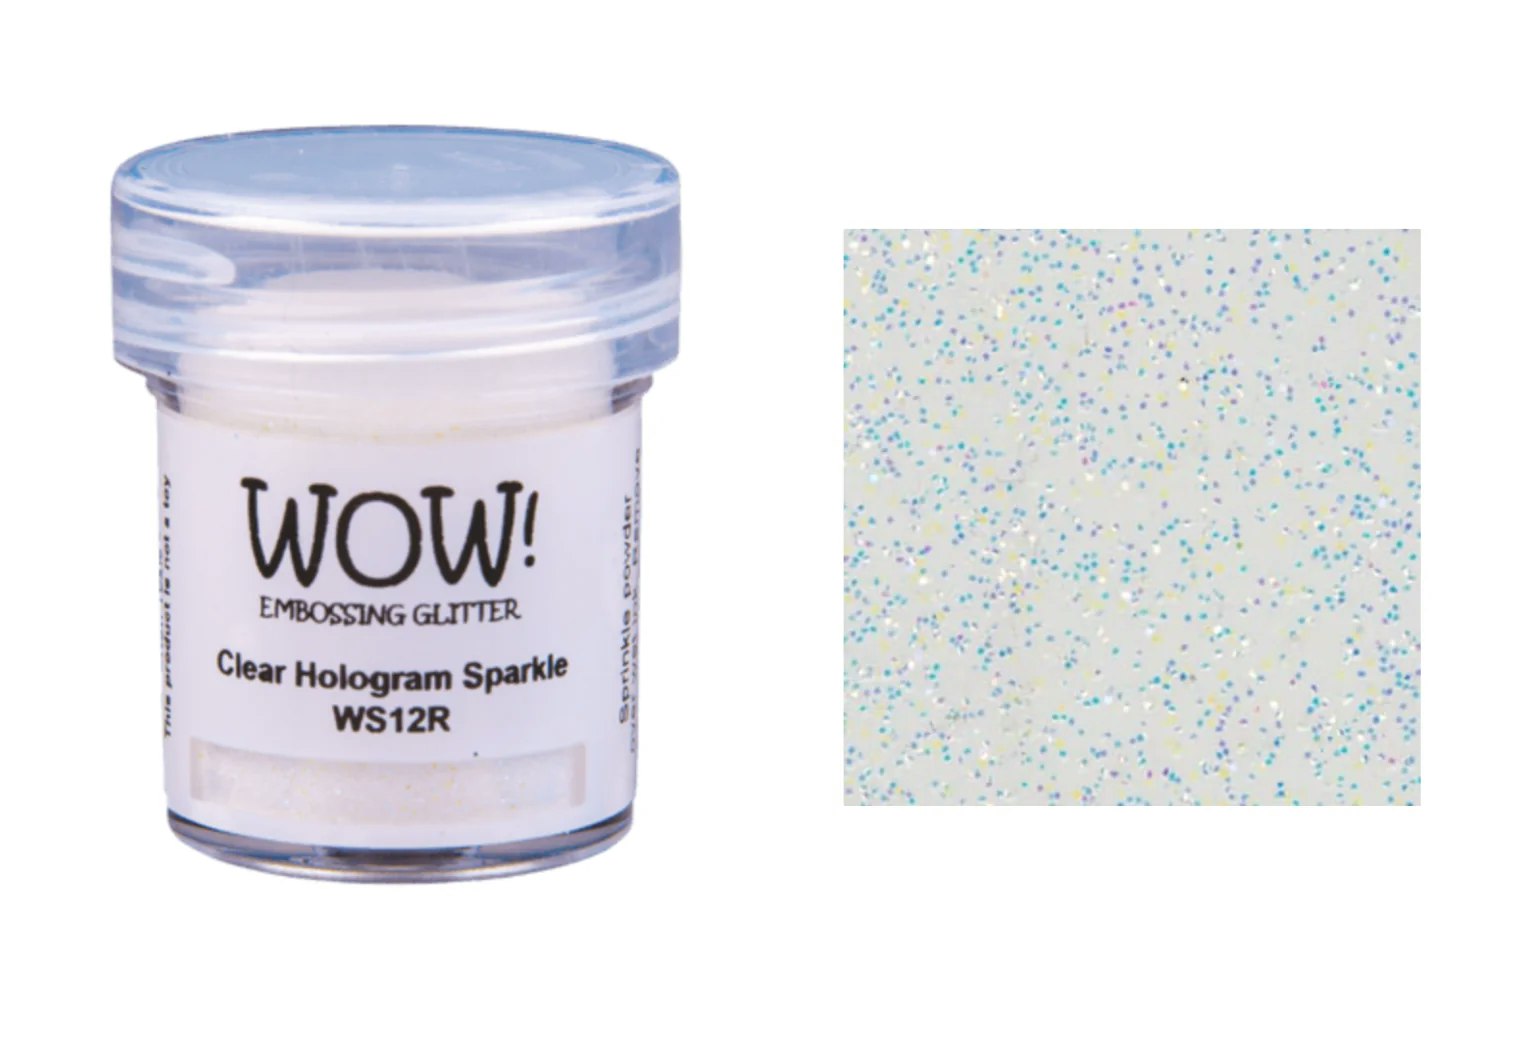 WOW! Embossing Glitter "Clear Hologram Sparkle" WS12R